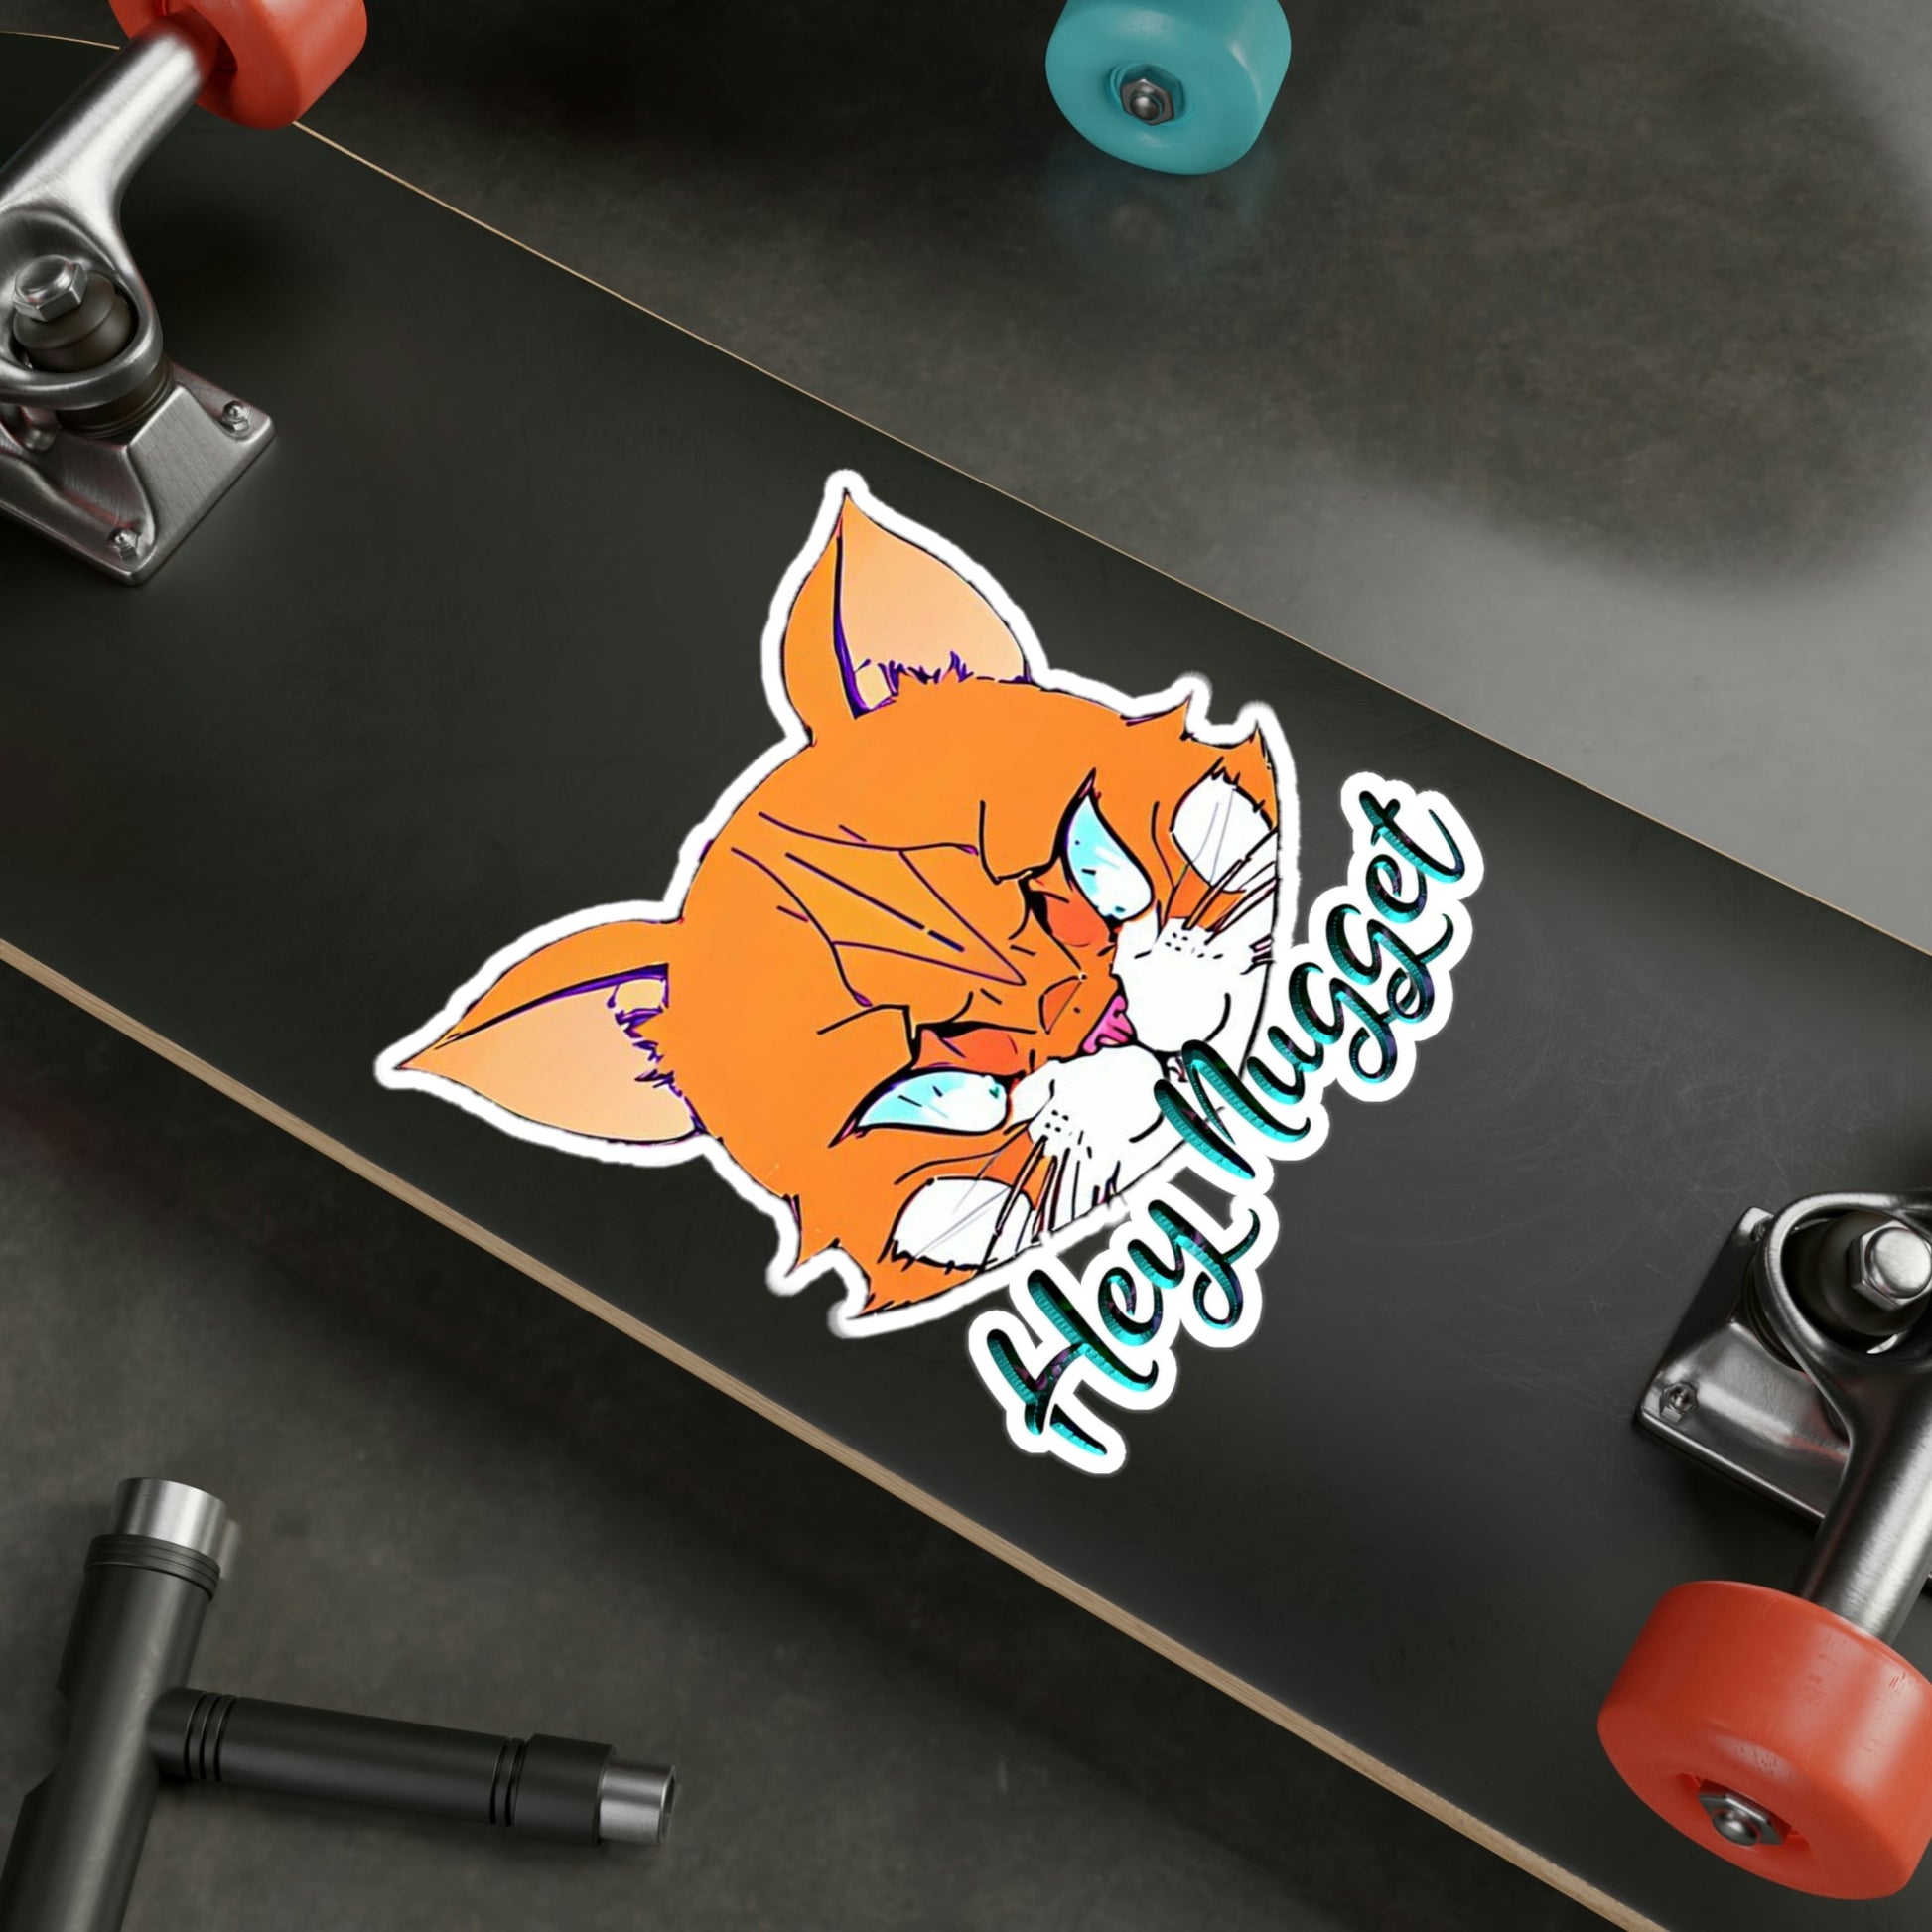 Stand out  with the  Vinyl Decals  available at Hey Nugget. Grab yours today!